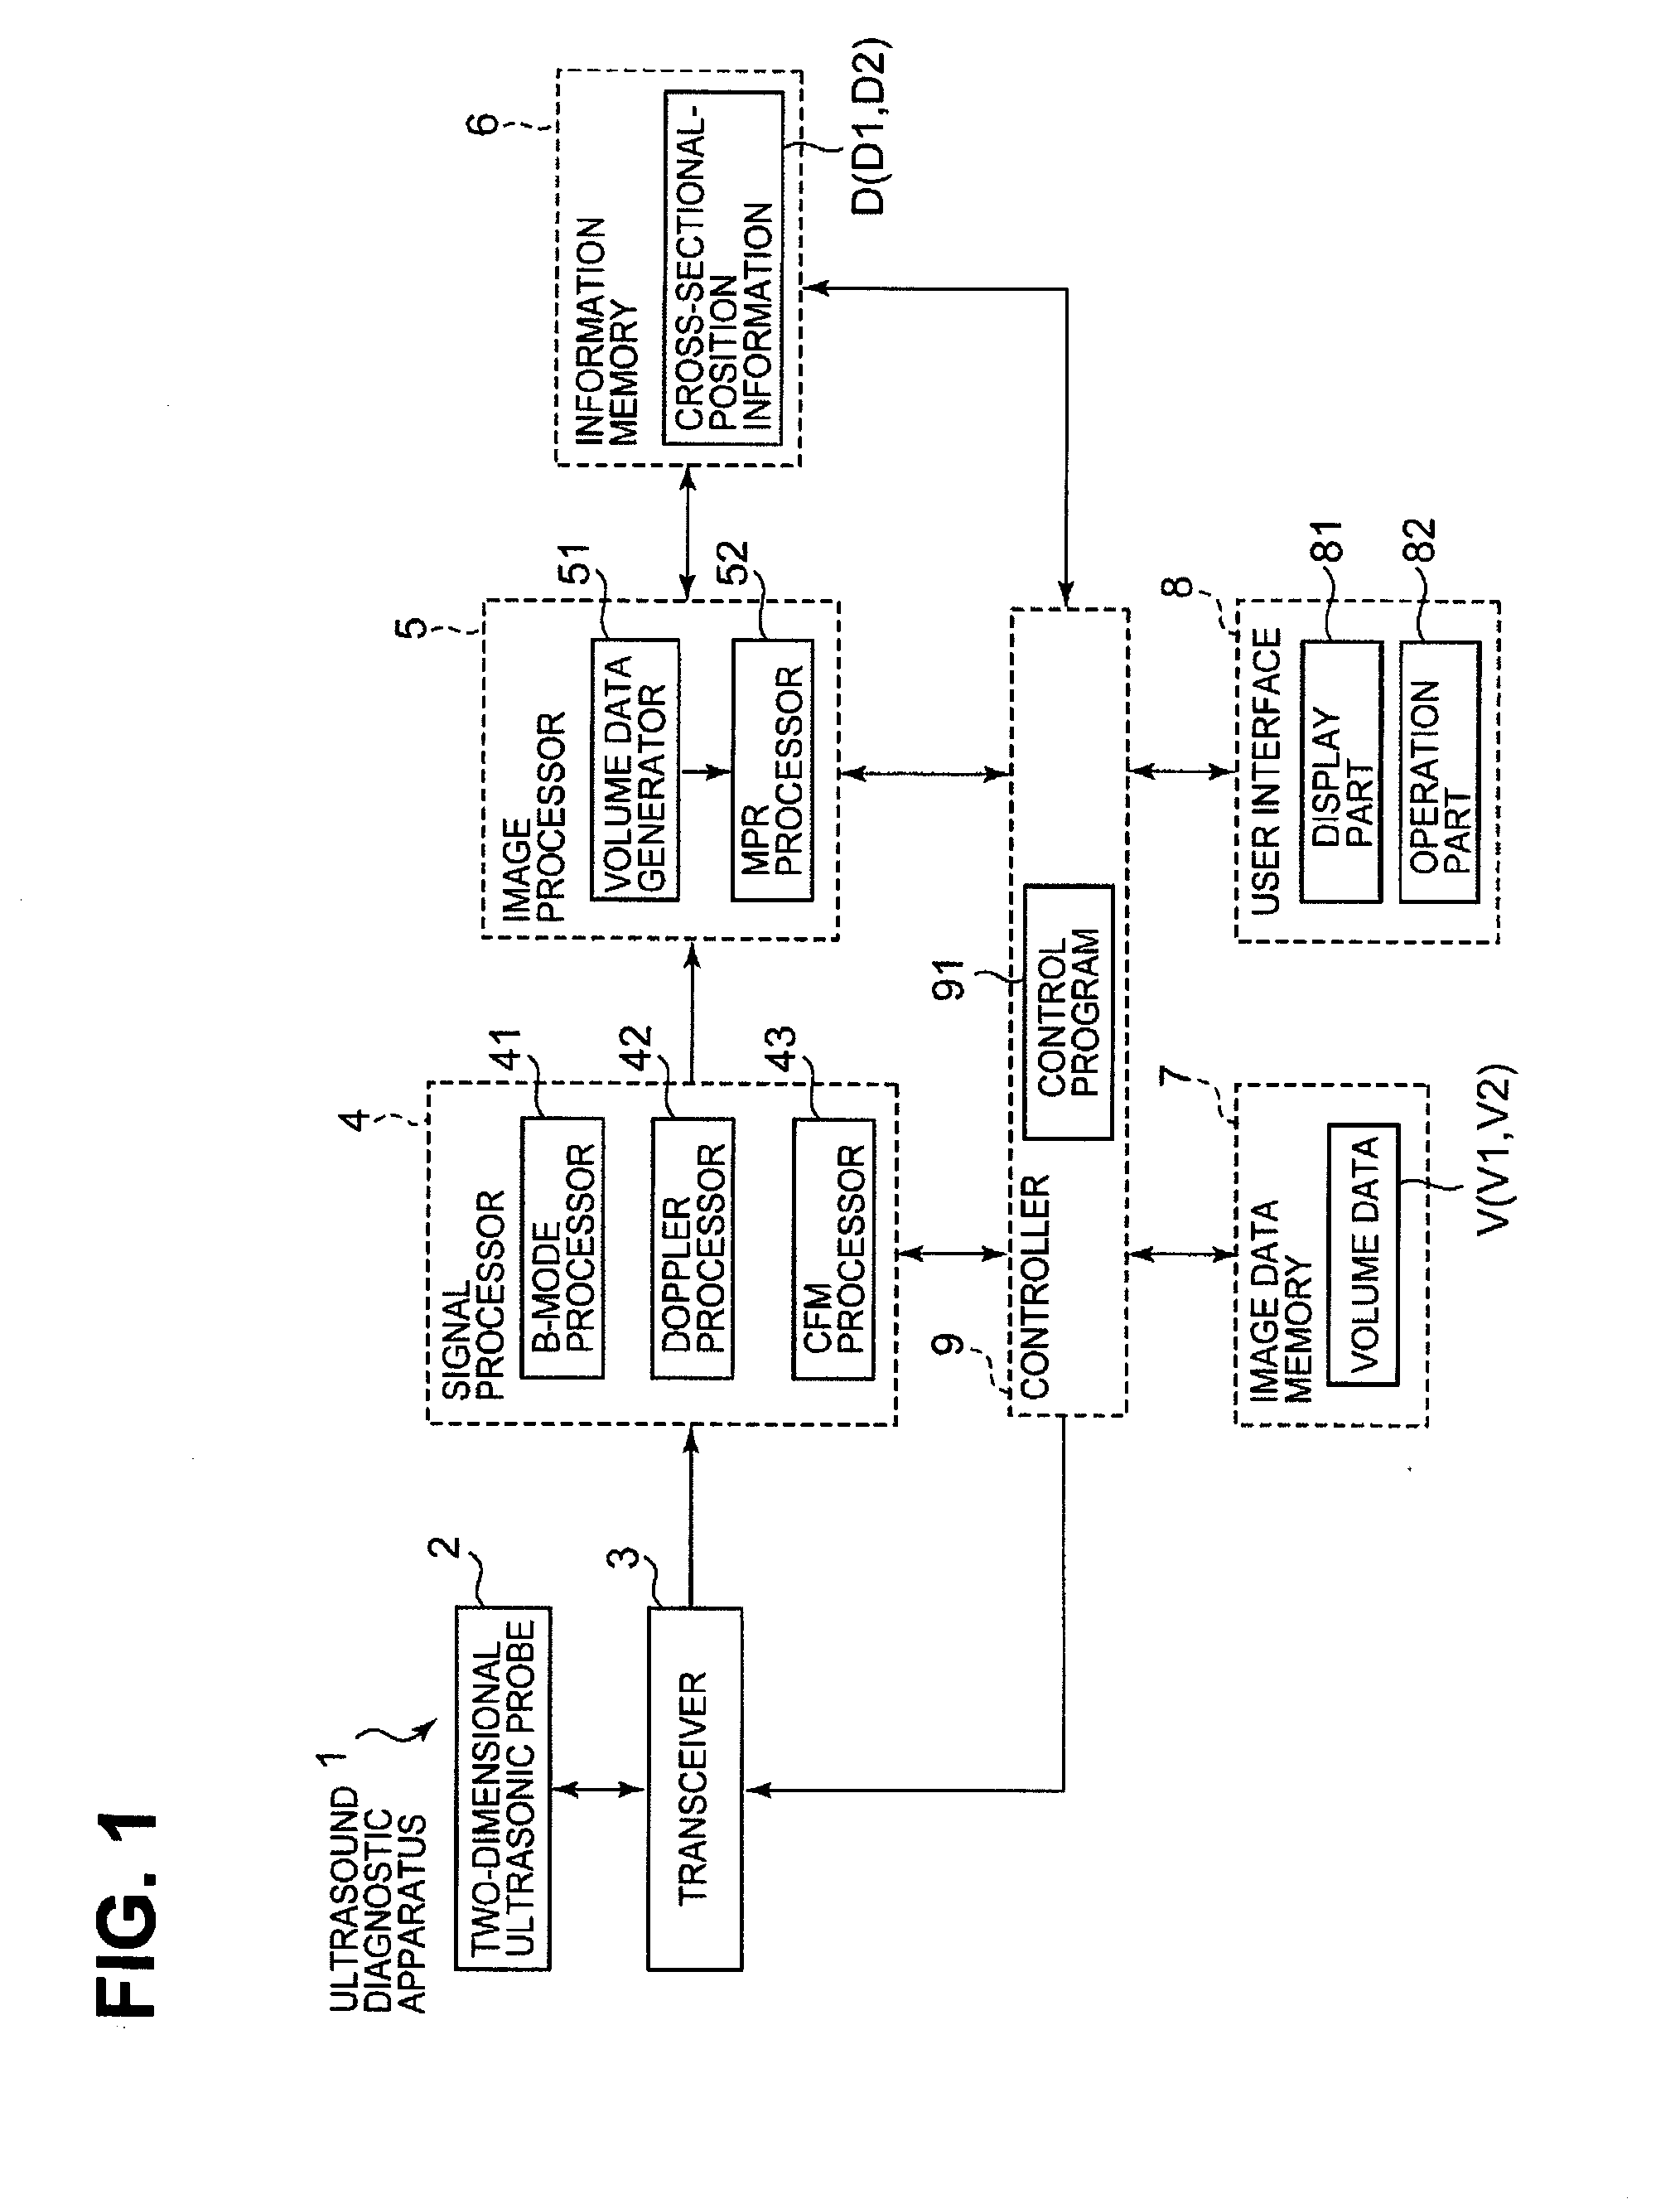 Ultrasound diagnostic apparatus and a medical image-processing apparatus